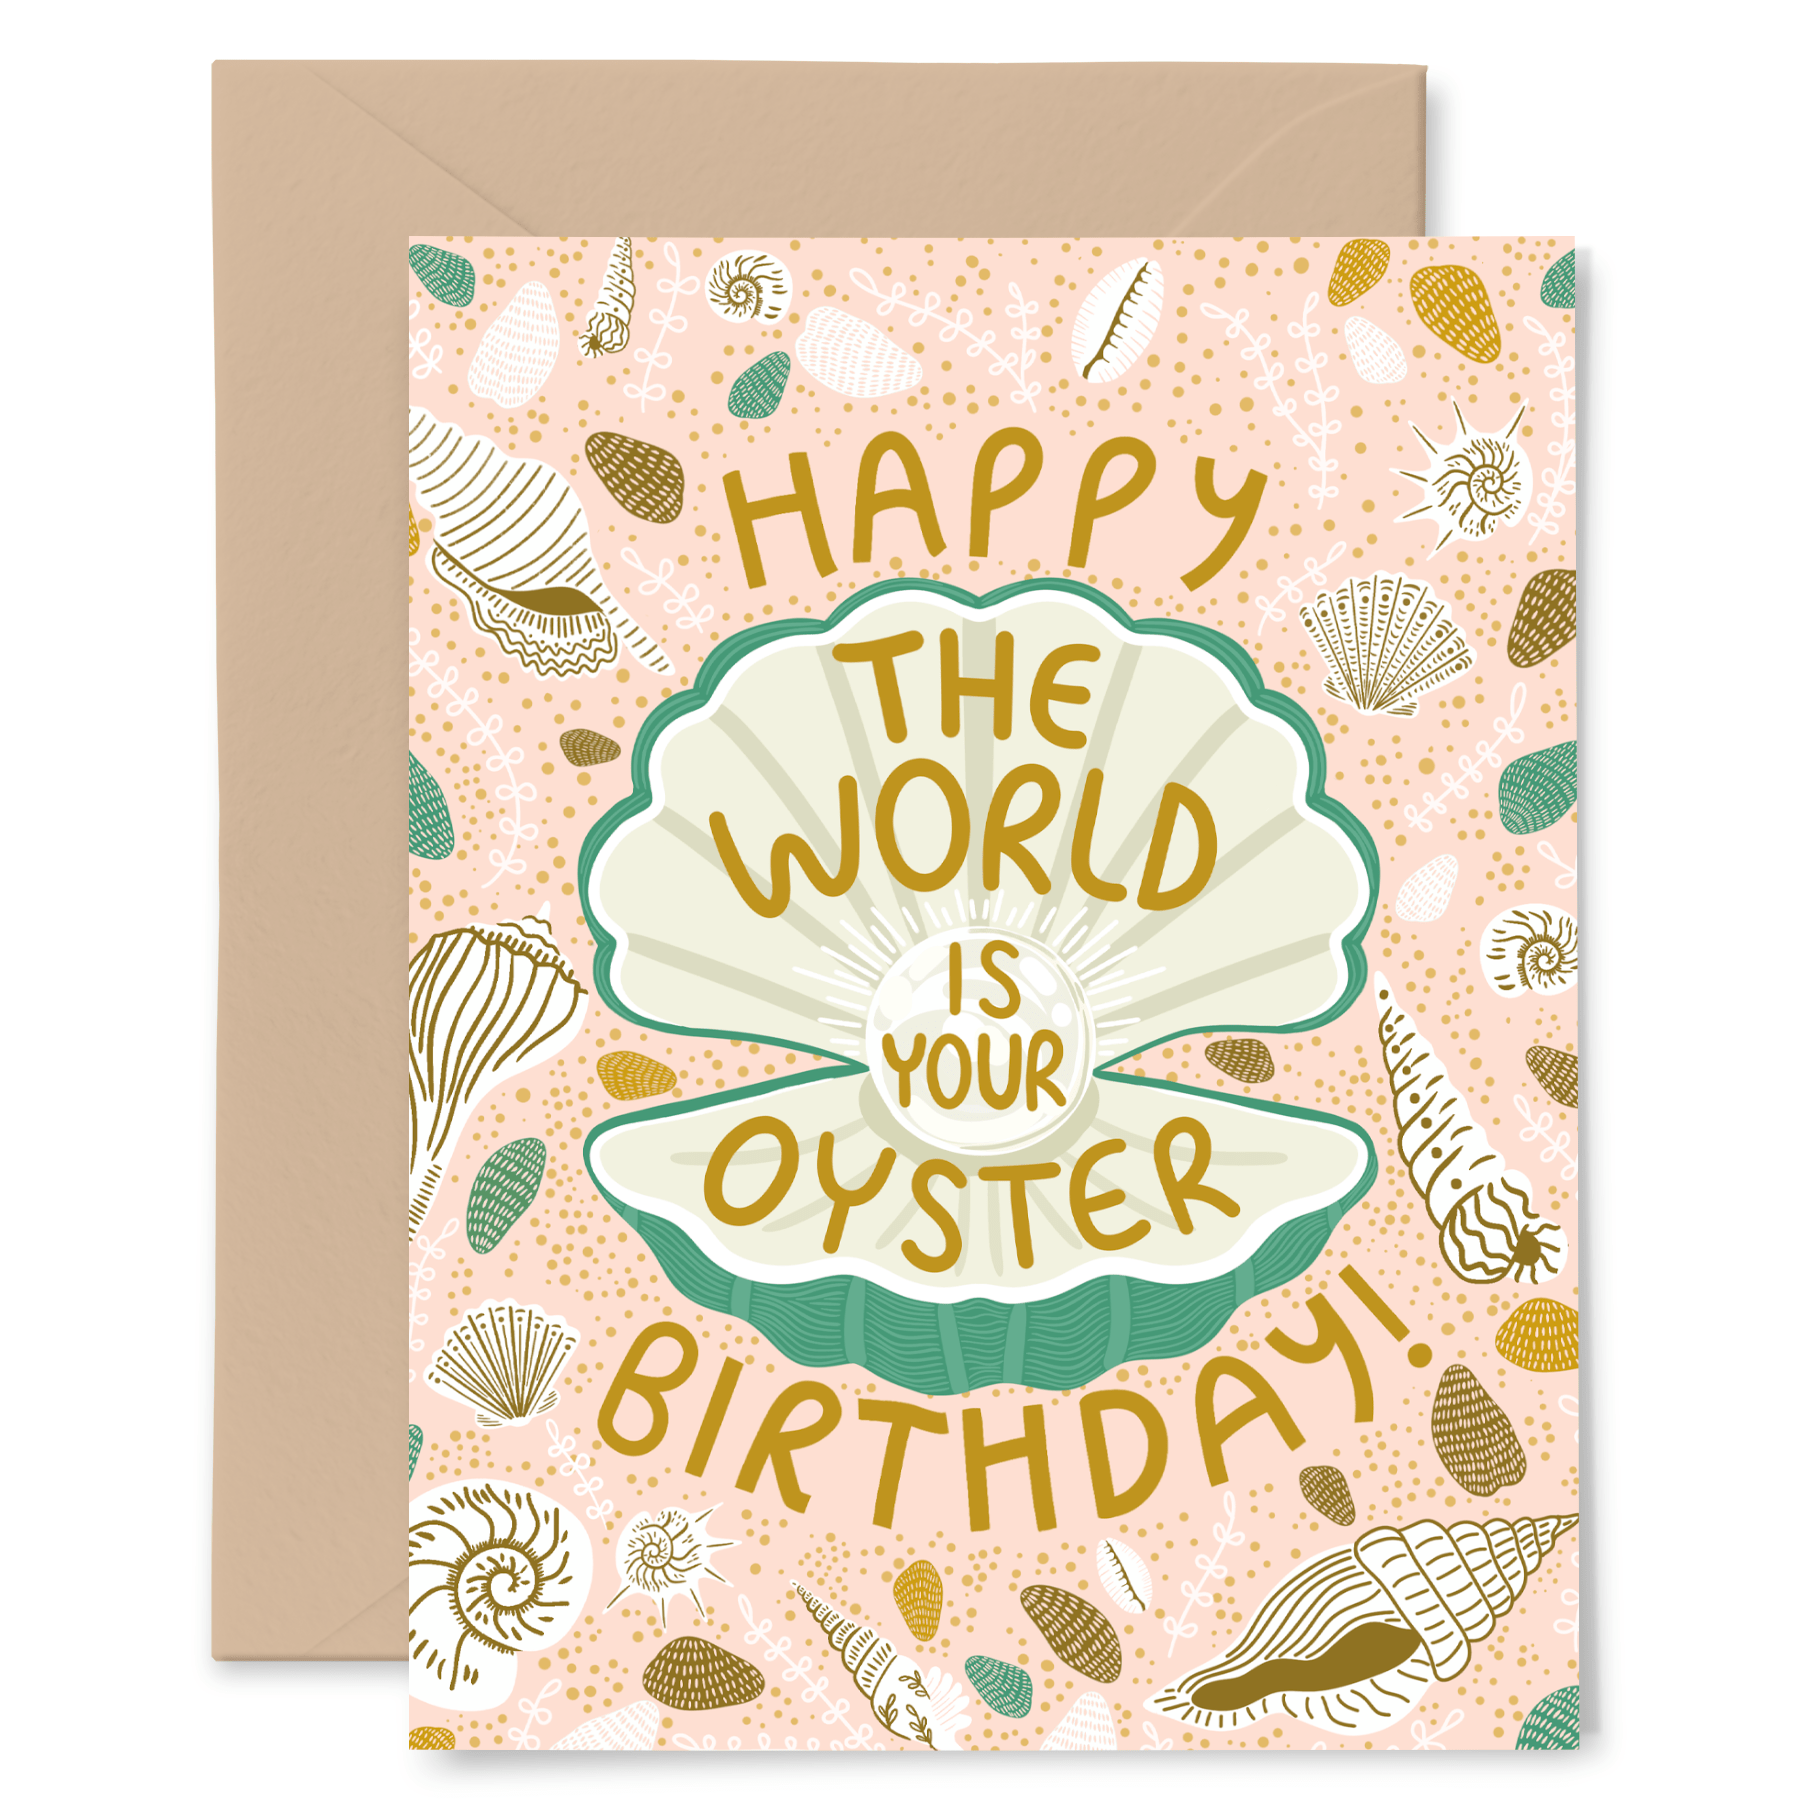 The World Is Your Oyster Birthday Card - Spiral Circle